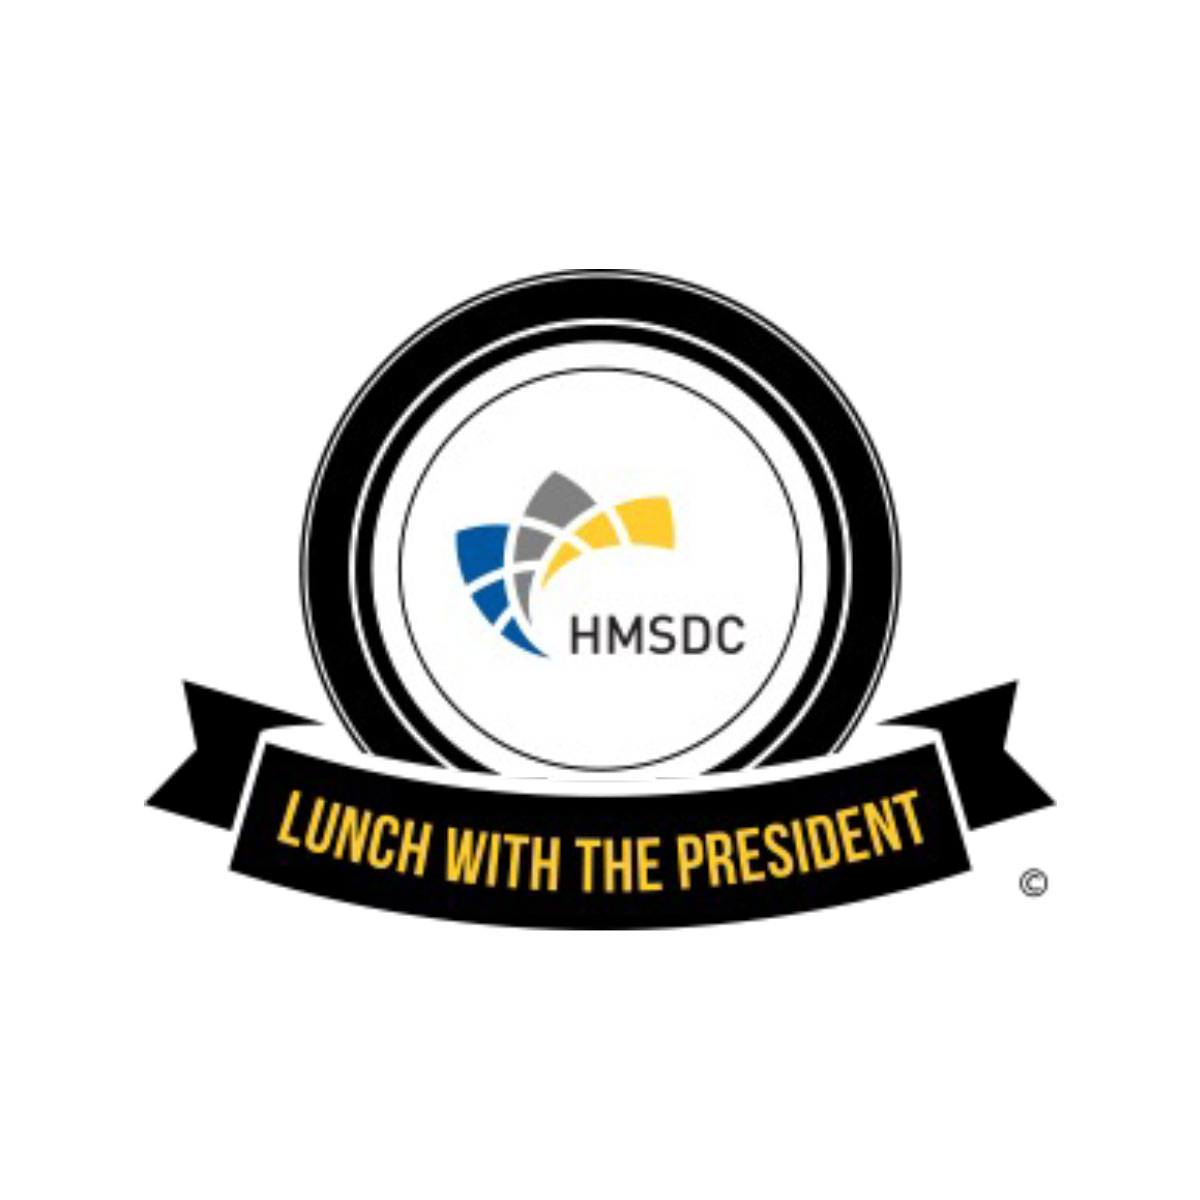 HMSDC Lunch with the President